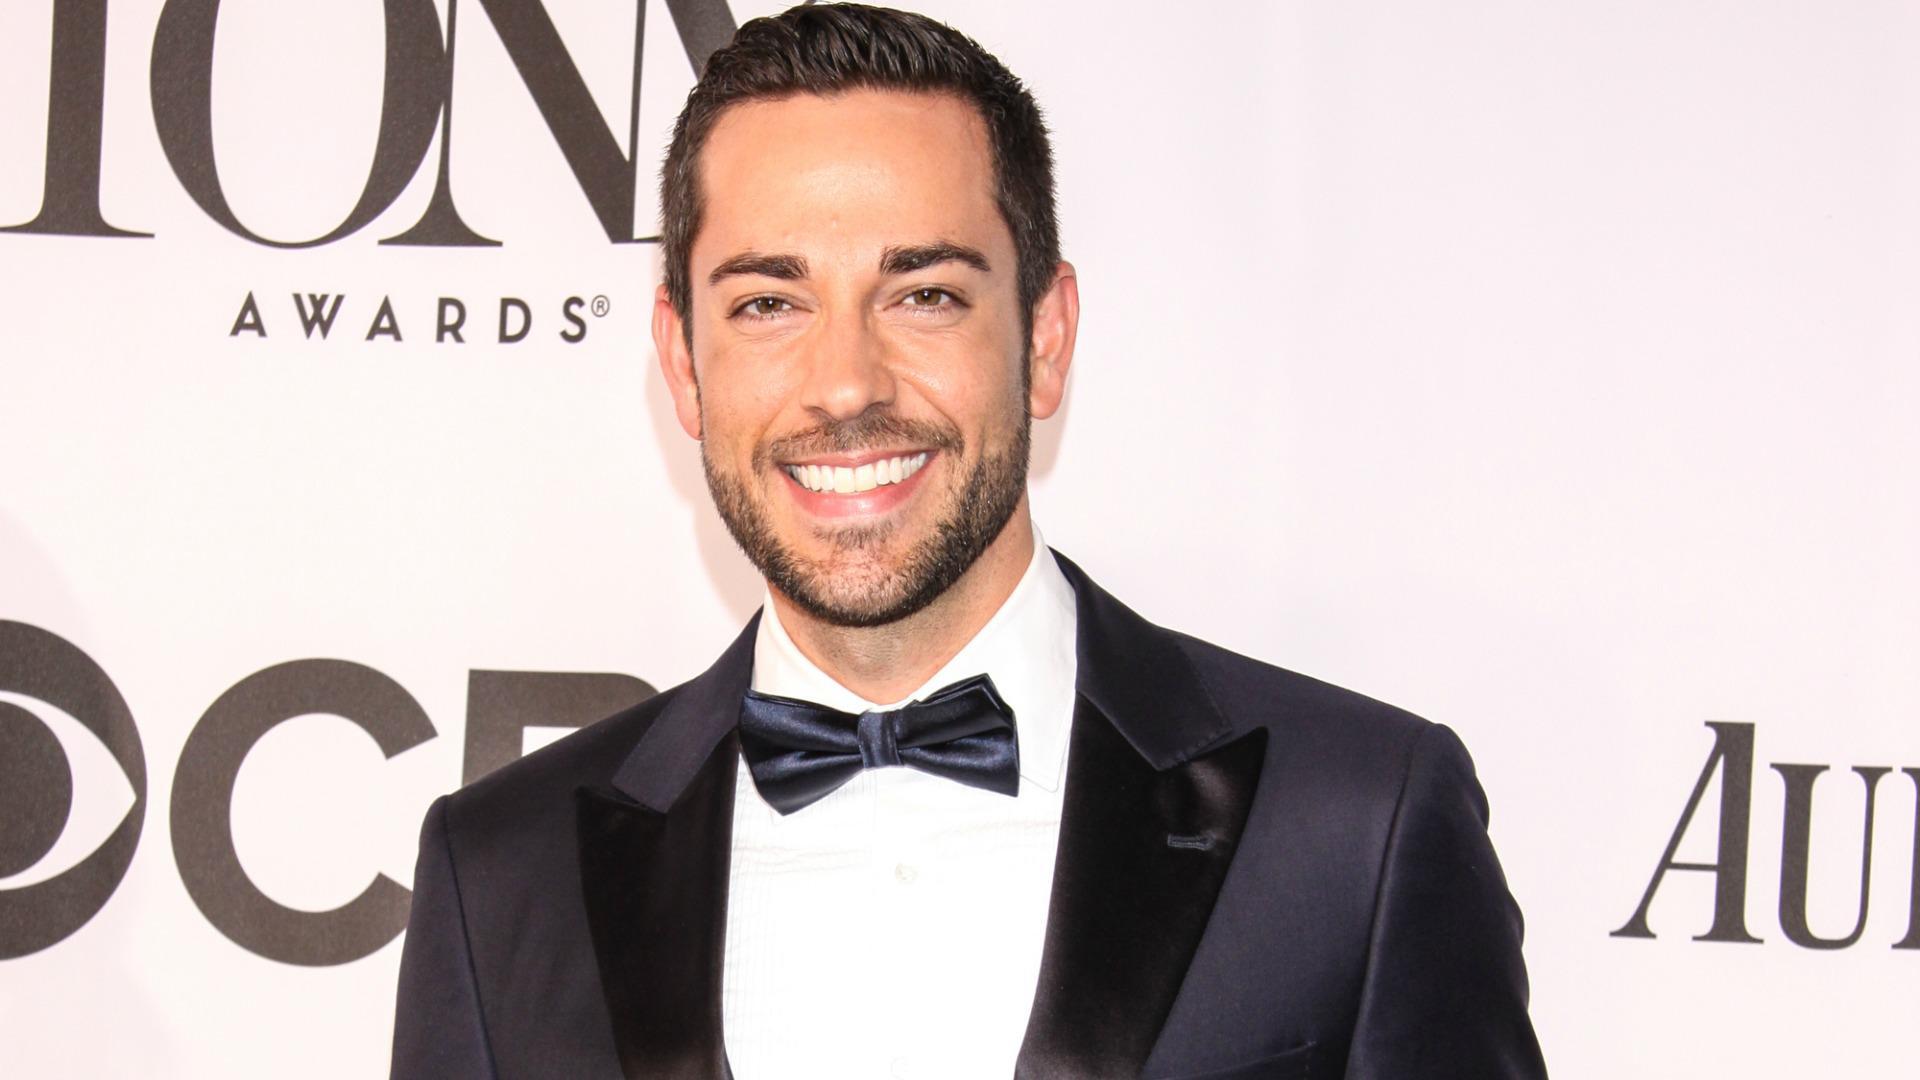 Zachary Levi's good at keeping secrets: He's a married man